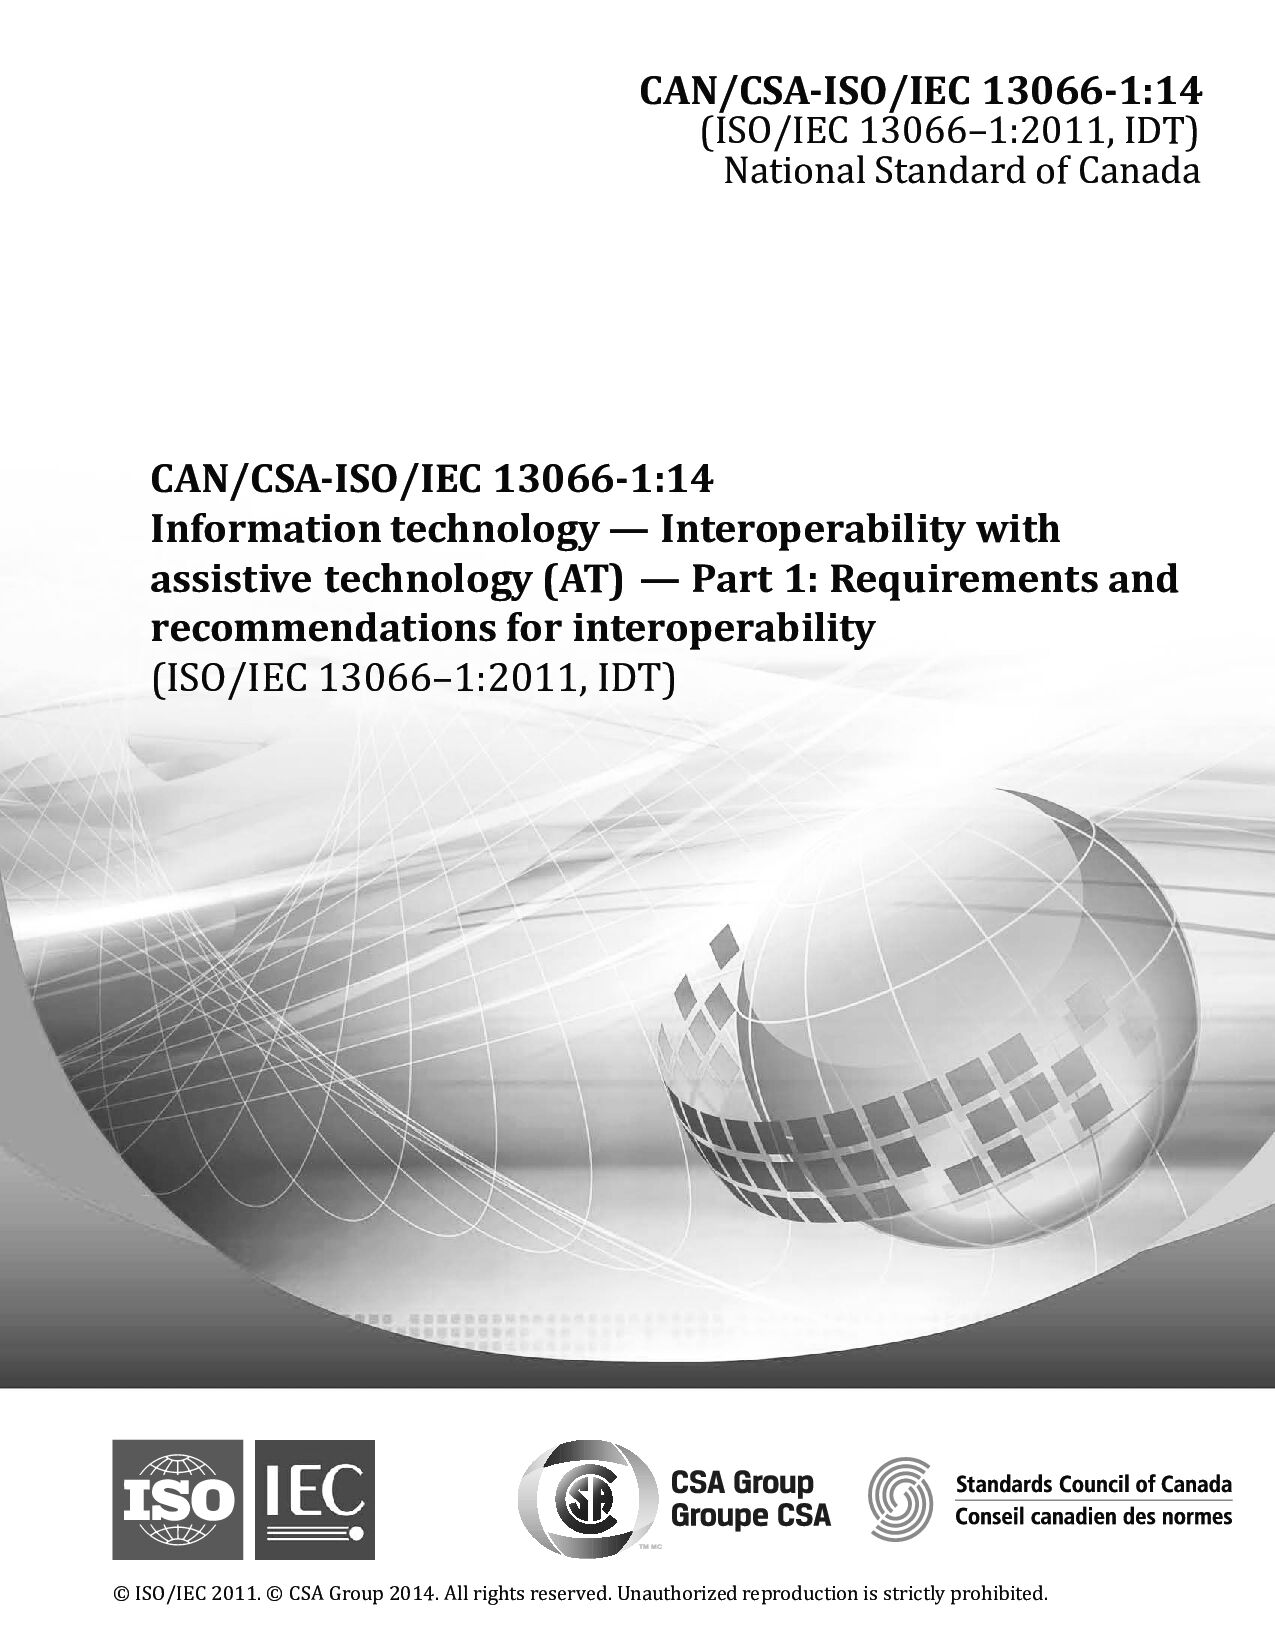 CAN/CSA-ISO/IEC 13066-1:2014